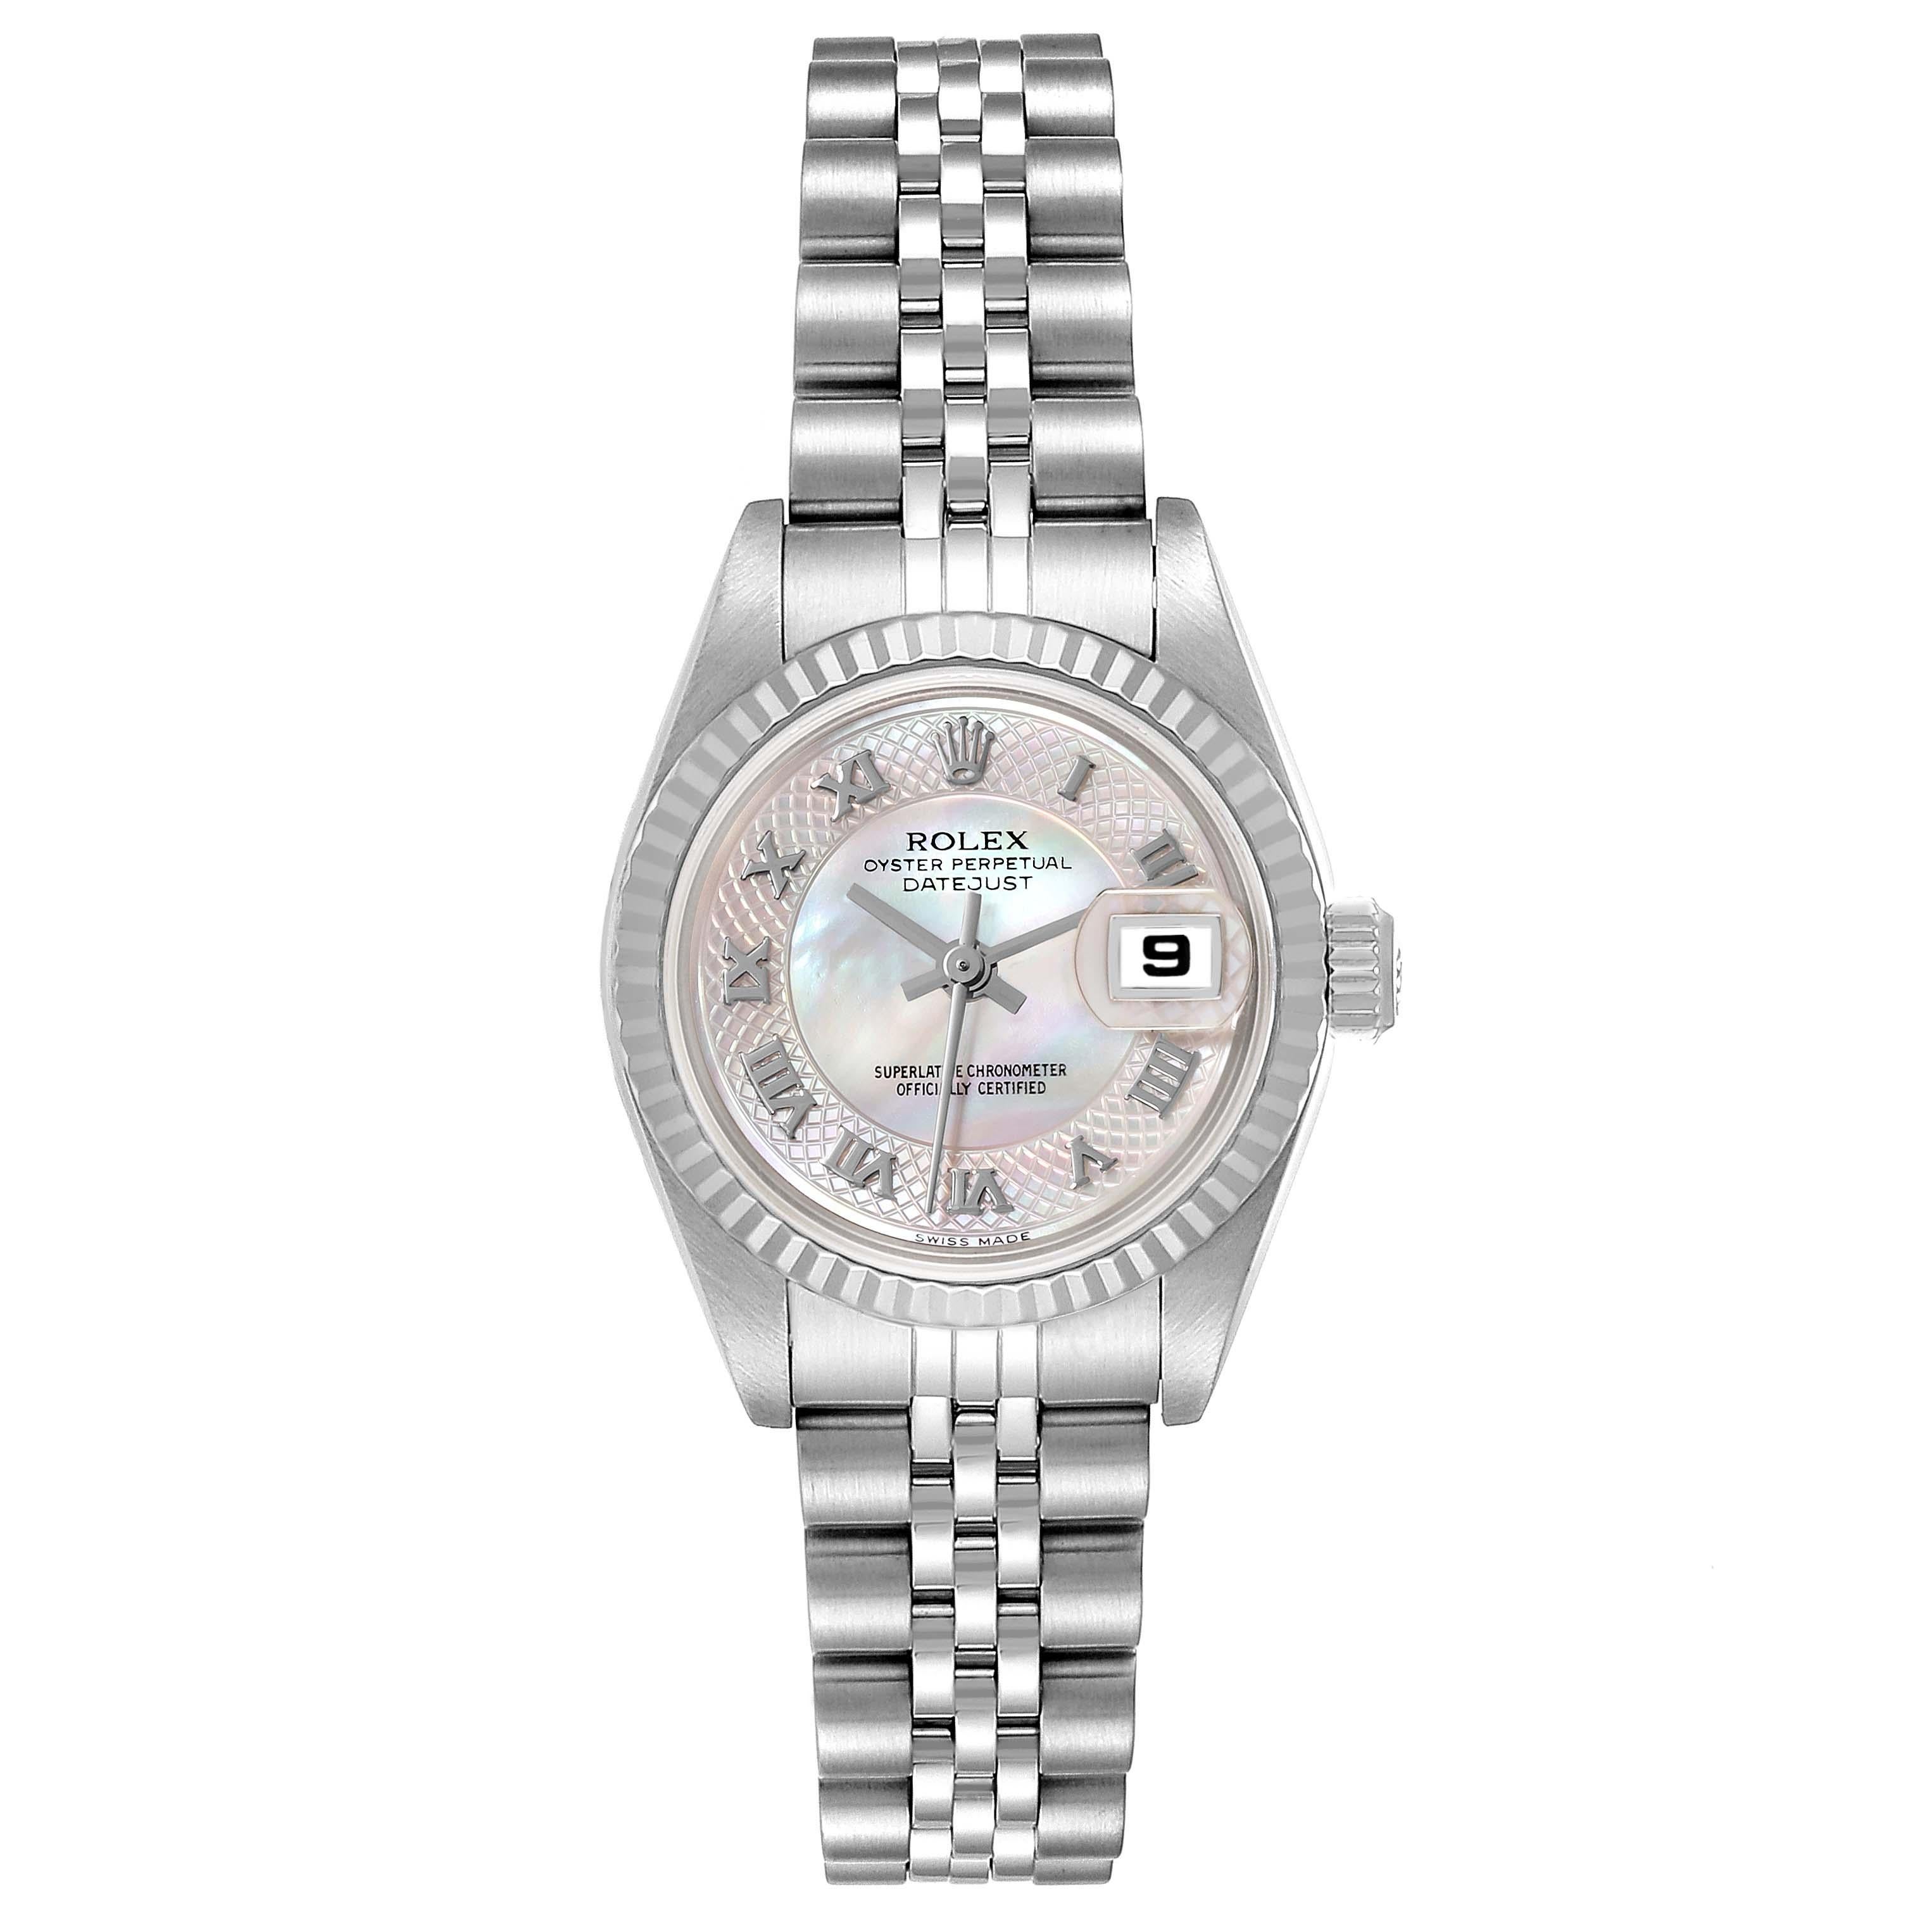 Rolex Datejust Steel White Gold Decorated Mother Of Pearl Ladies Watch 79174. Officially certified chronometer automatic self-winding movement. Stainless steel oyster case 26.0 mm in diameter. Rolex logo on a crown. 18K white gold fluted bezel.